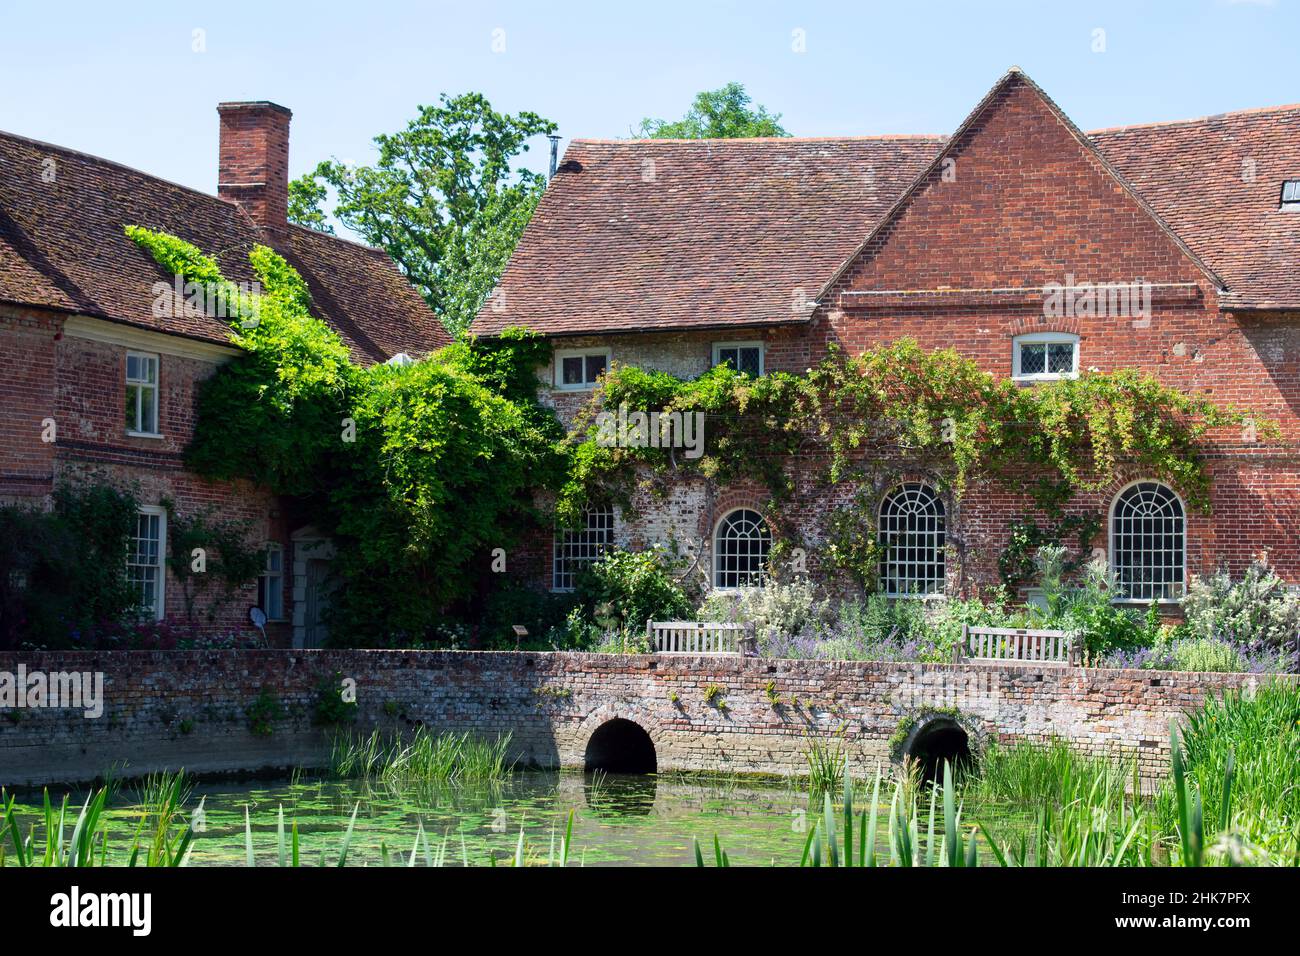 Flatford Mill and the Miller's Cottage, Operated by the National Trust in Suffolk, England. Foliage and vines climb the brickwork of the listed mill. Stock Photo